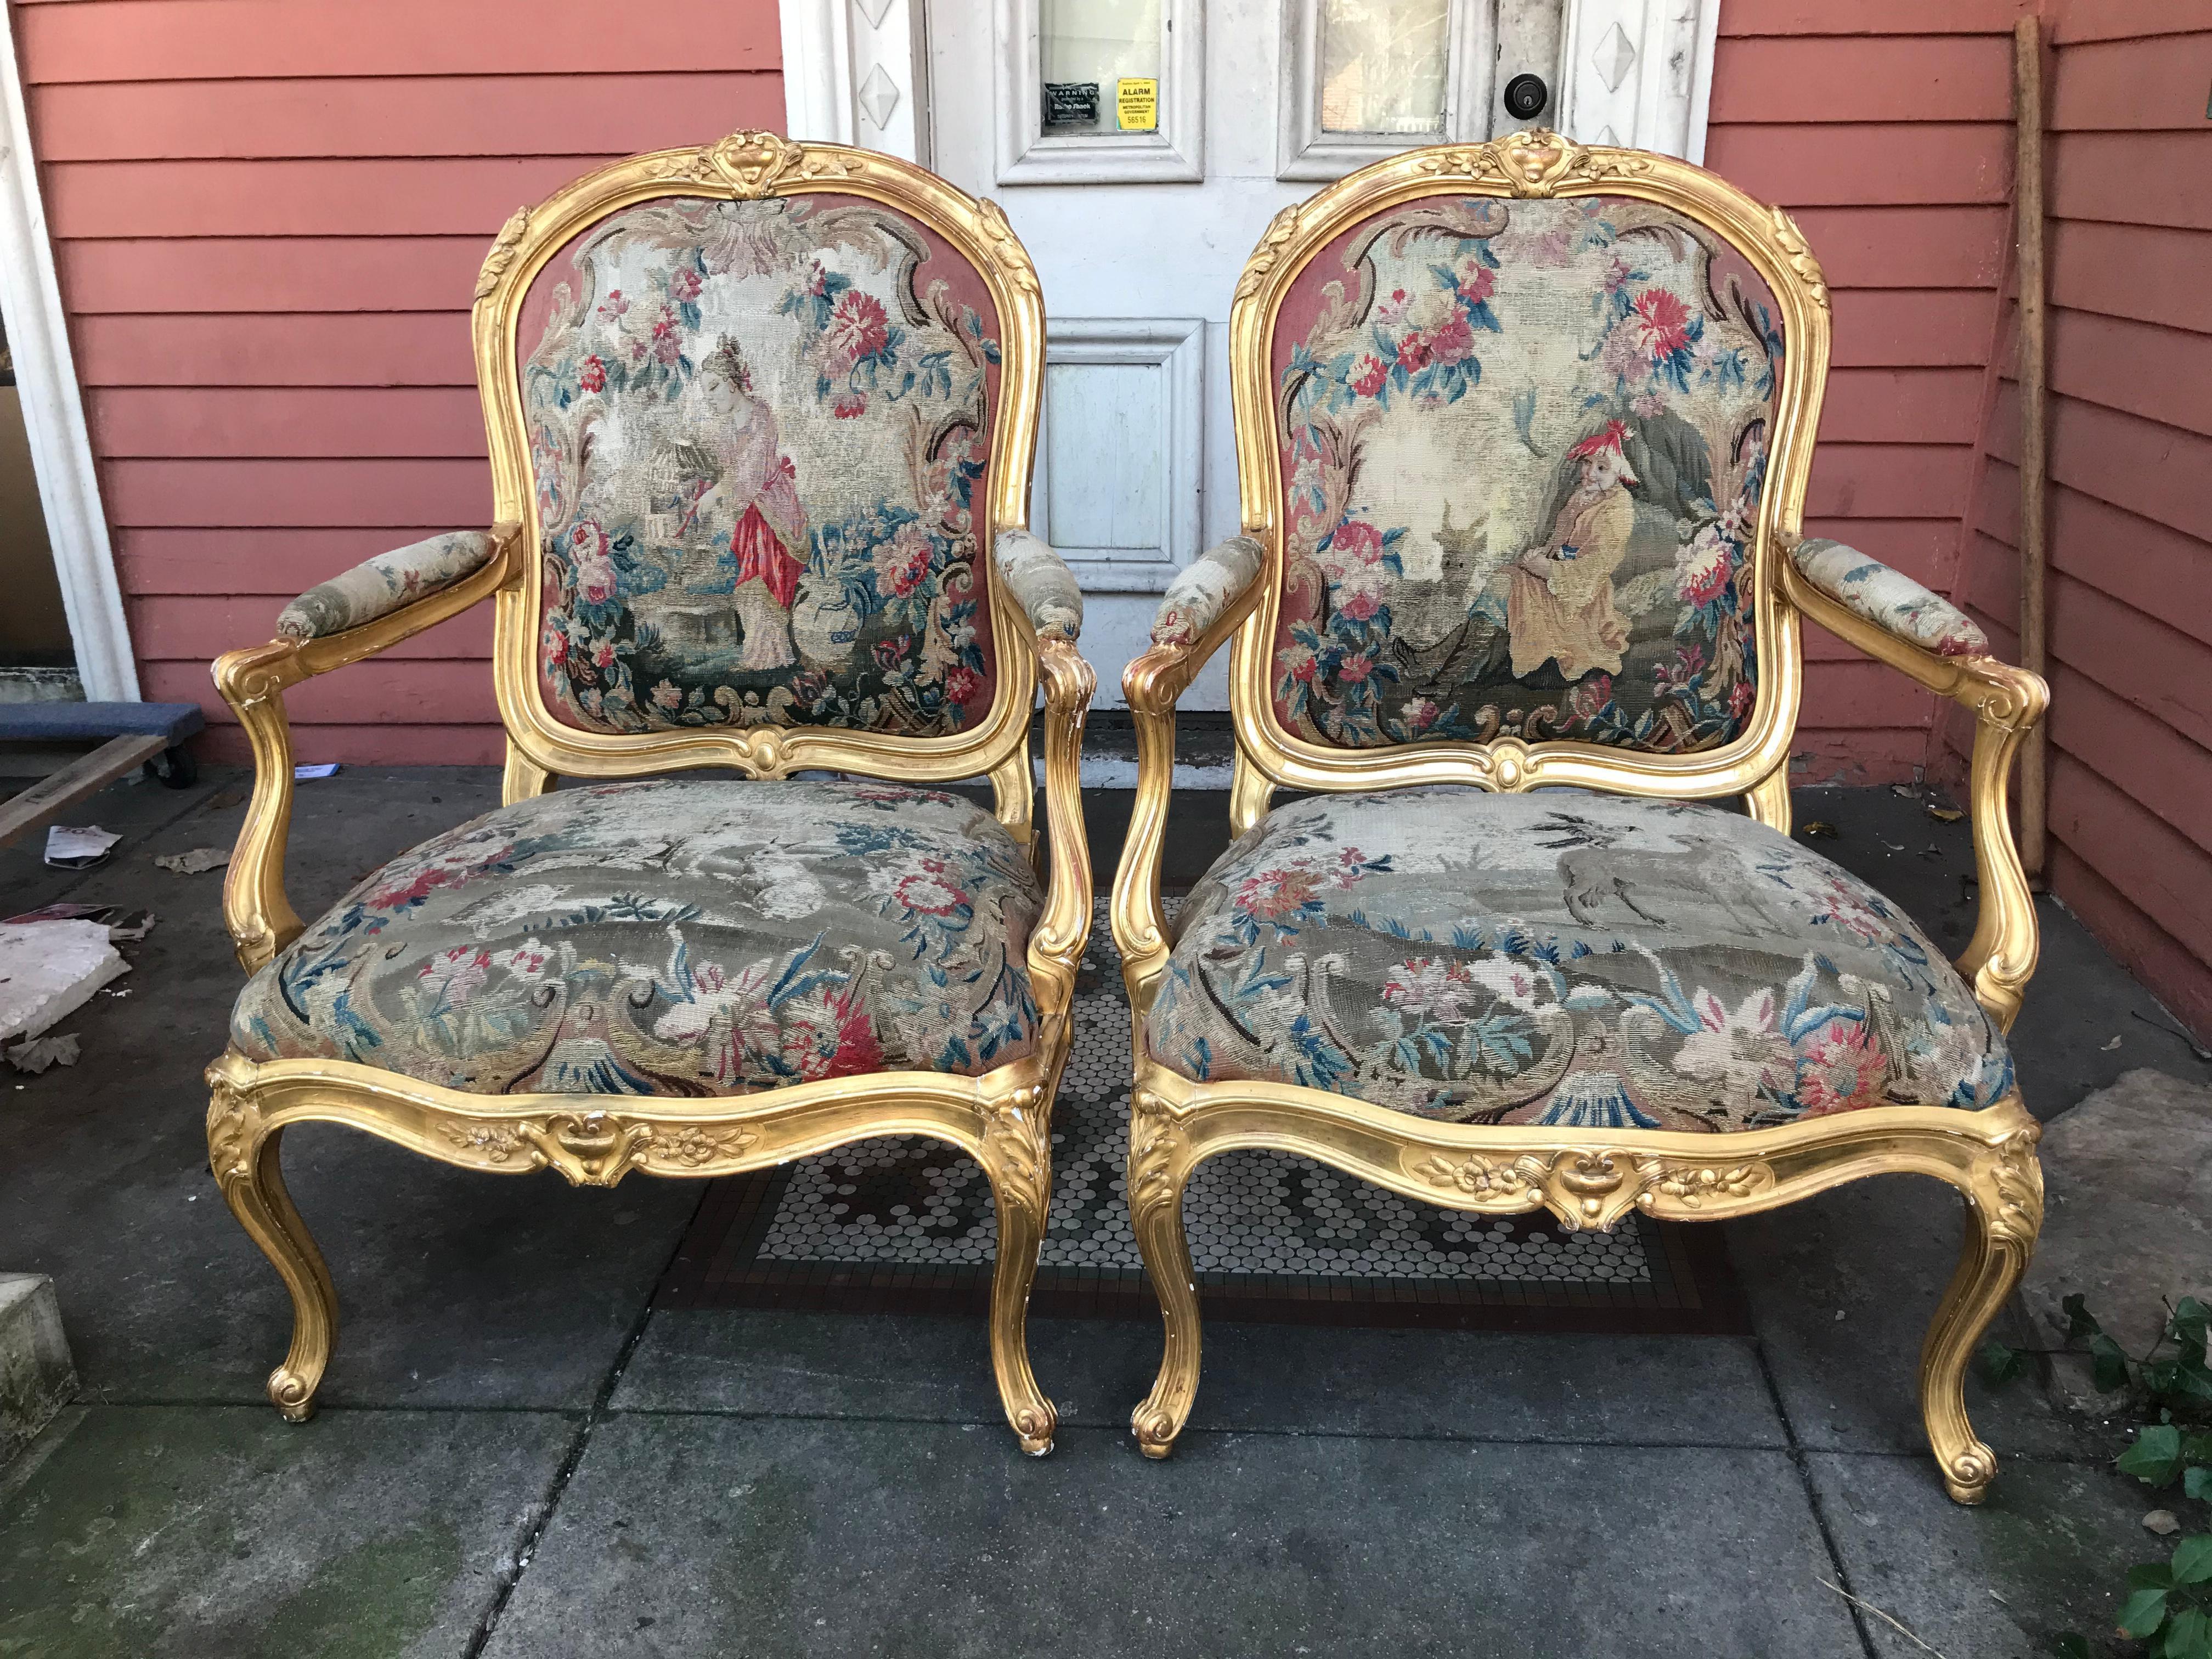 Estate lawyers say must sell as probate close looms . Pair of unusually large and commodious giltwood fauteuil with possibly 18th century chinoiserie tapestry later associated (and after a conservation process ). The floral tapestry embellished with